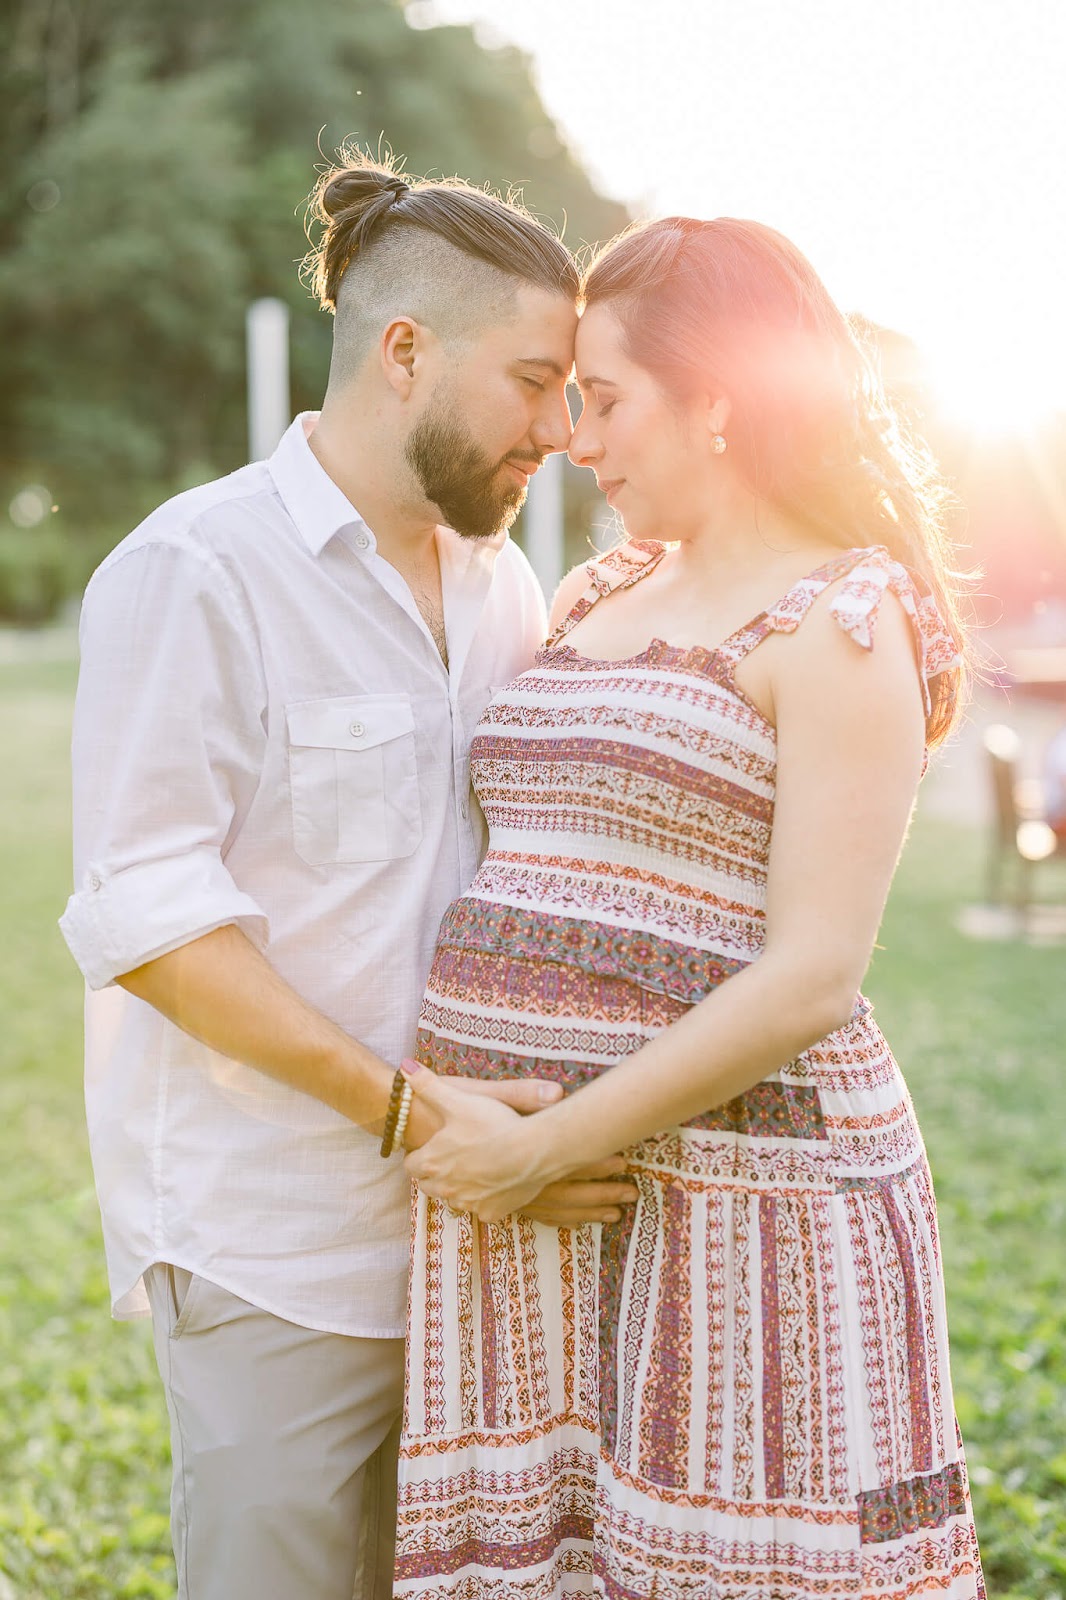 Pregnant couple sunset photography